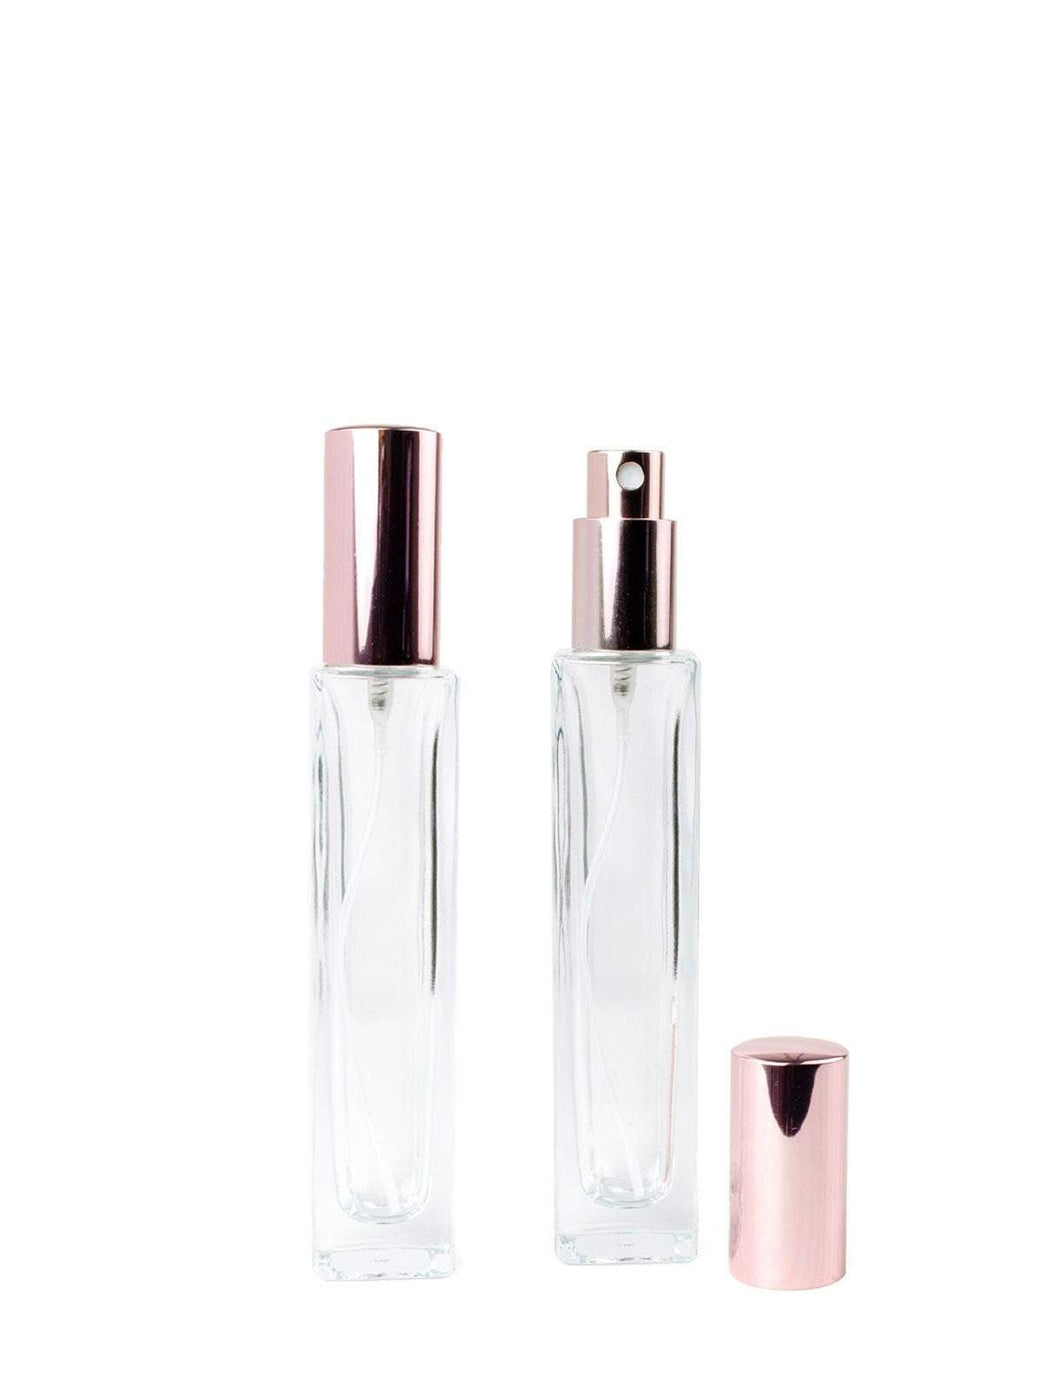 1 ROSE GOLD Perfume ATOMIZER Empty Clear Glass 50ml 1.7 Oz Square Columnar Spray Bottle